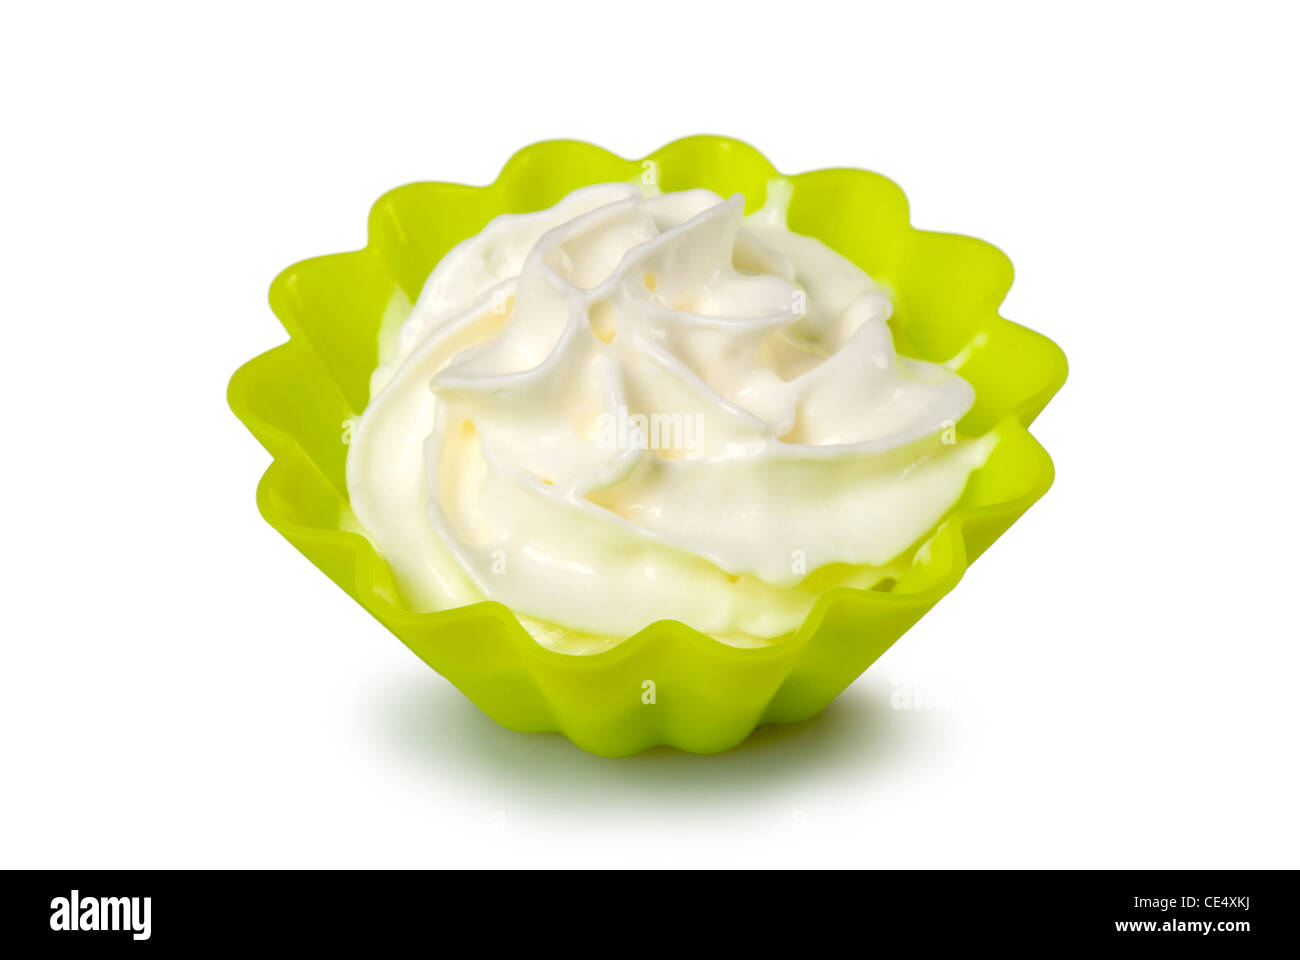 Portion of whipped cream over white background. Shallow DOF Stock Photo